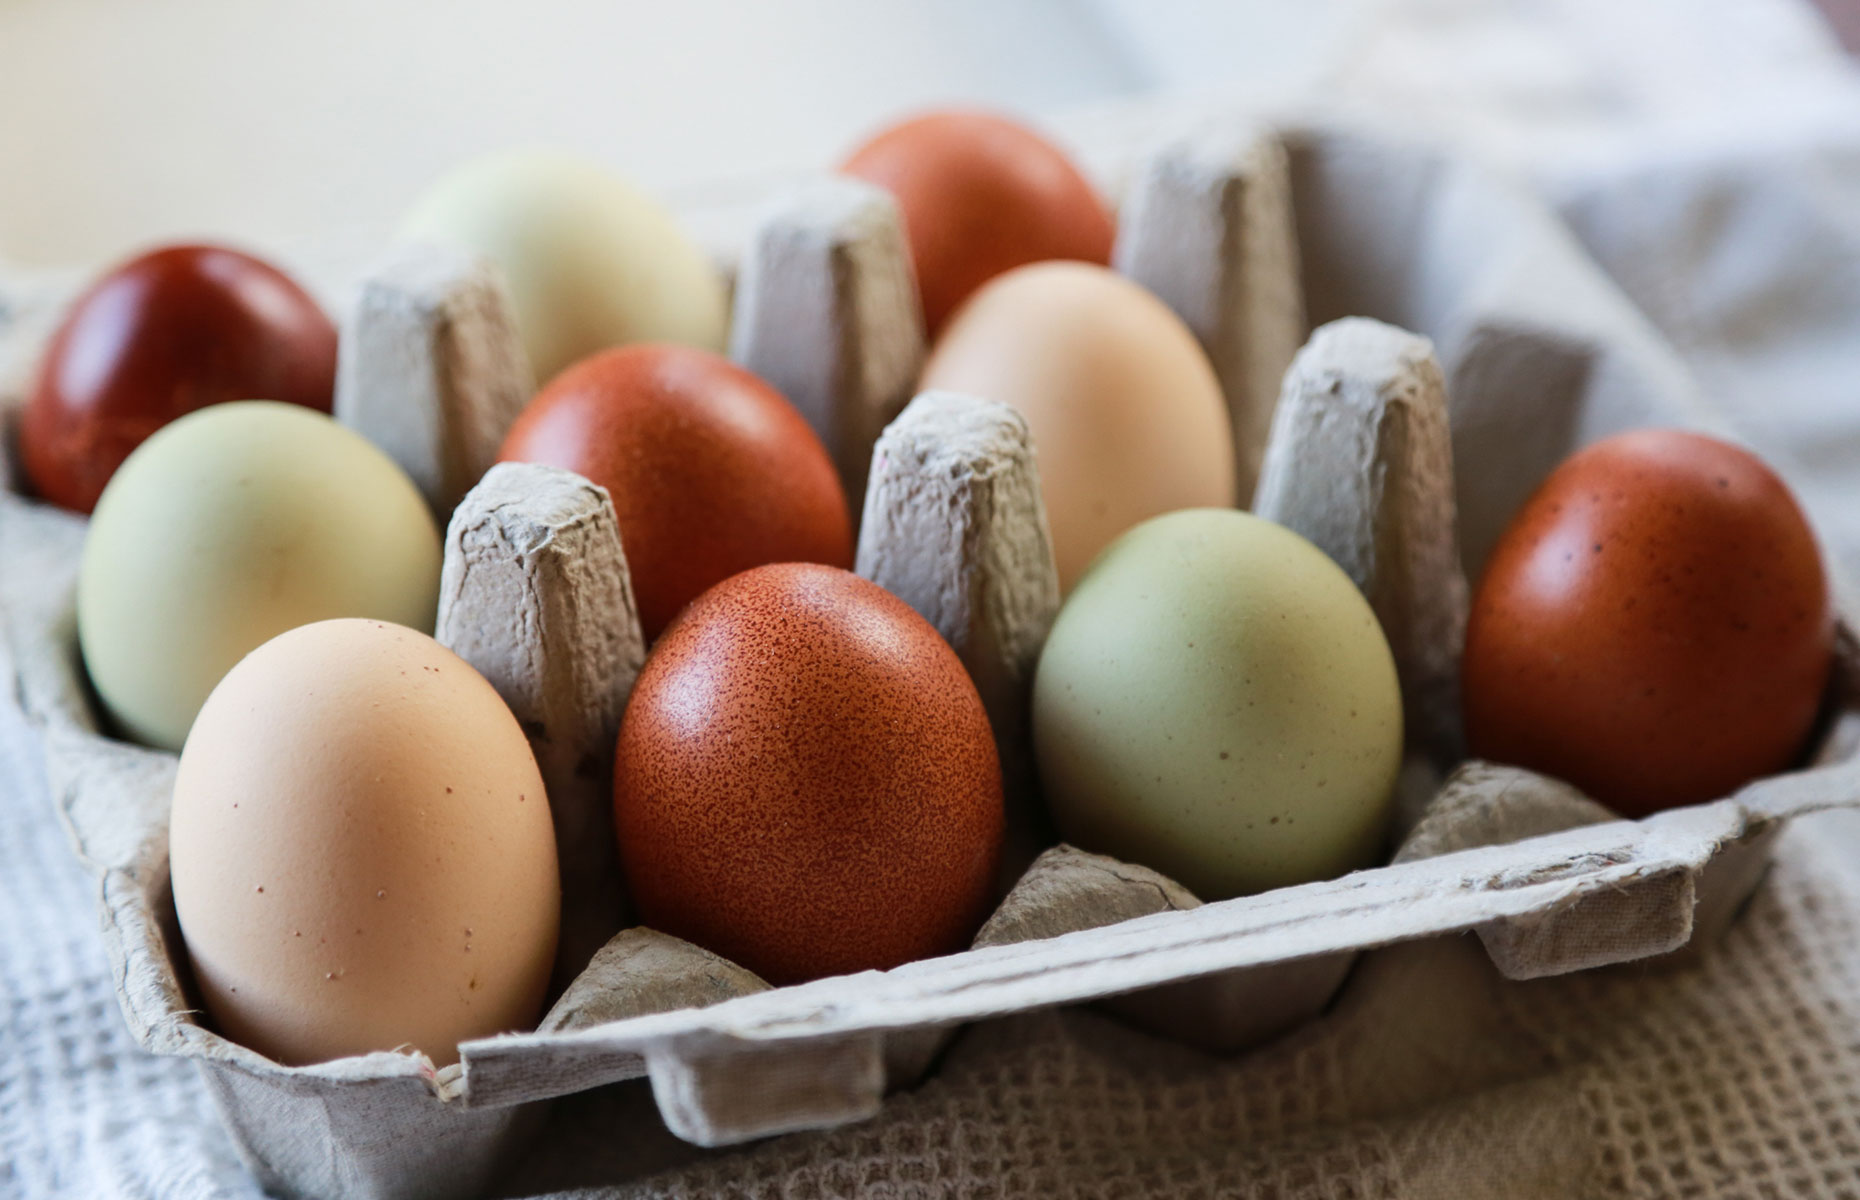 Chicken eggs in different colours including brown and blue (Image: PTZ Pictures/Shutterstock)